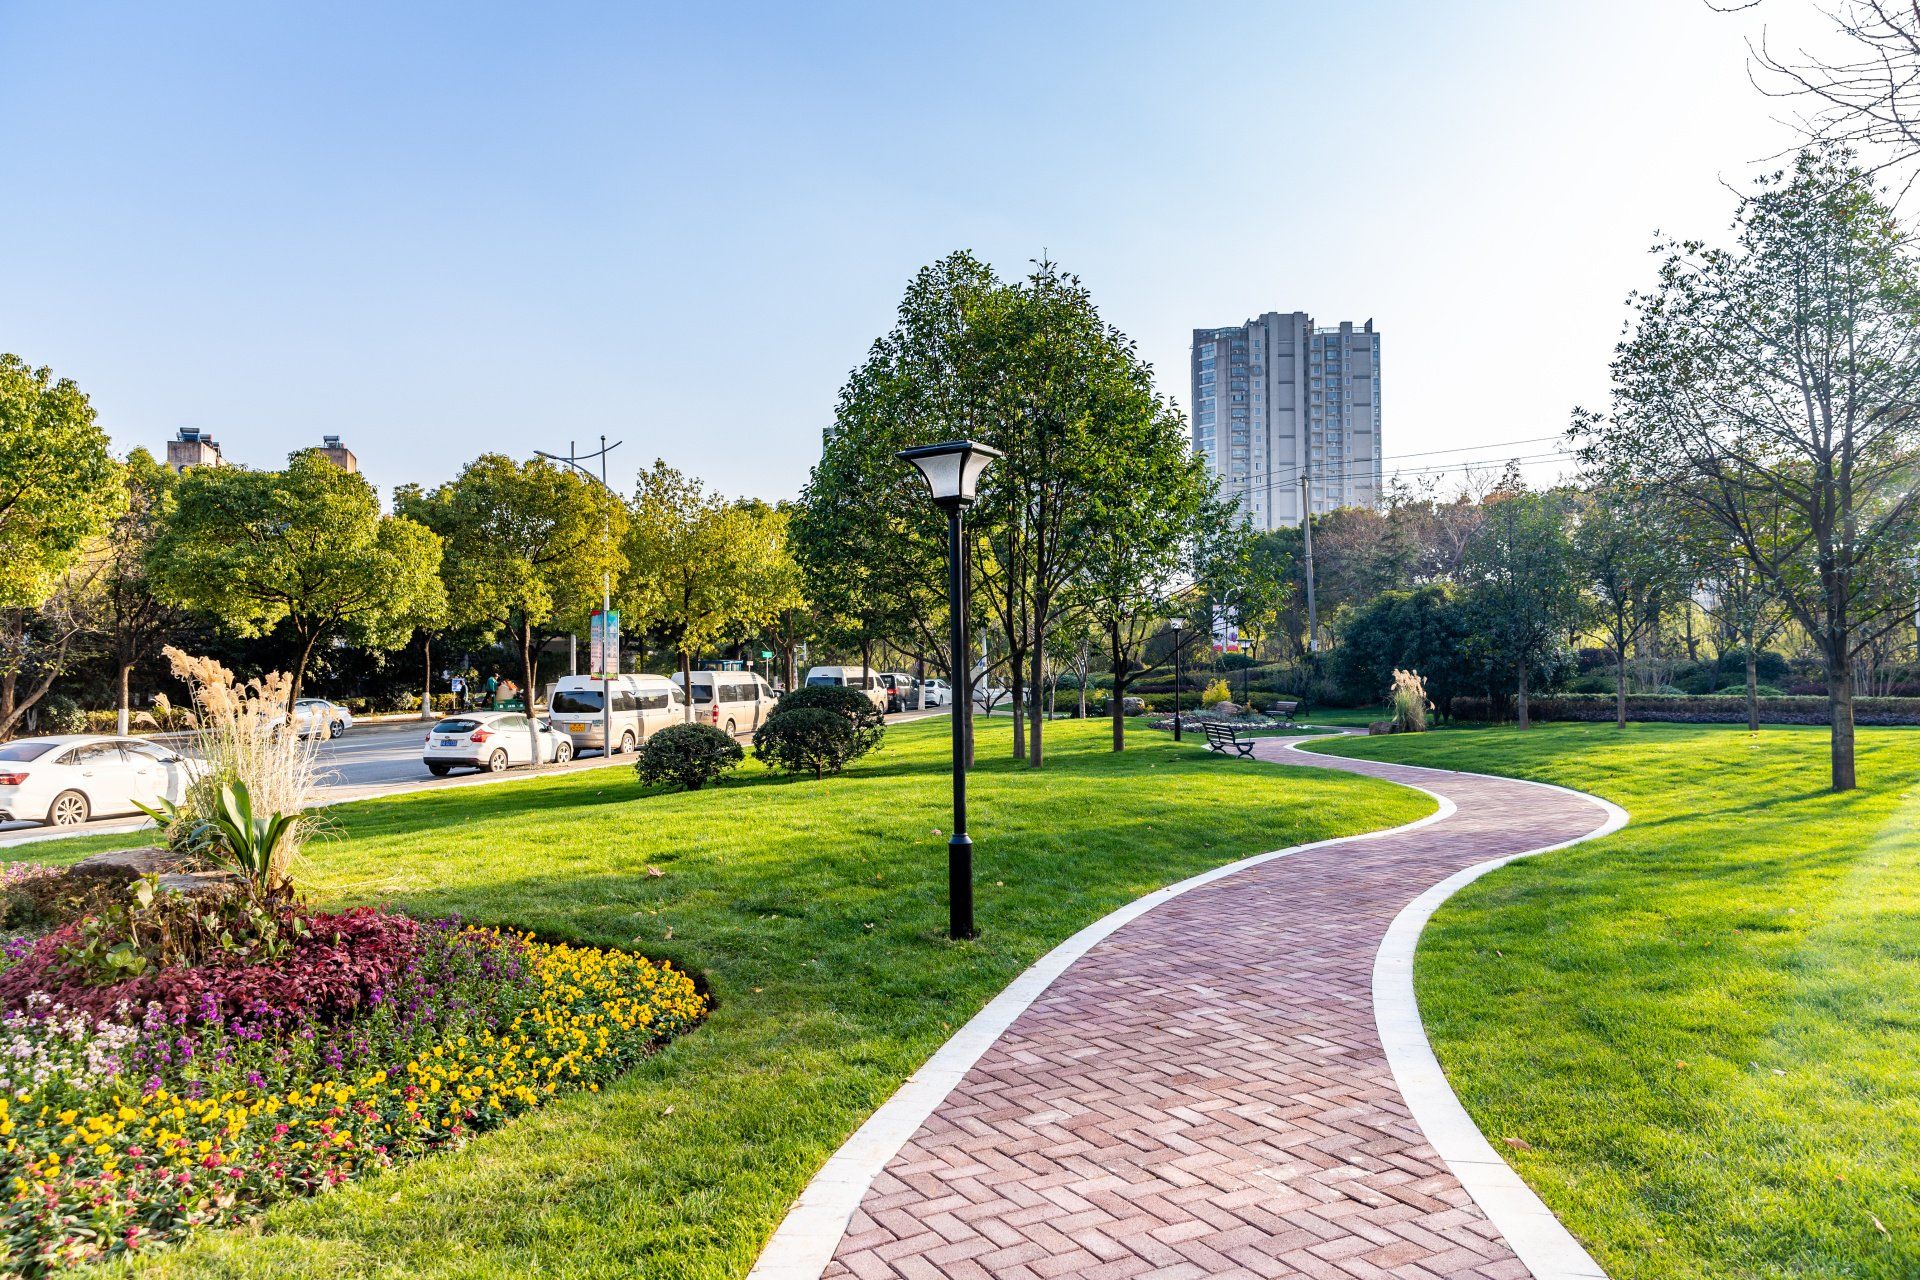 A serene, lush green park with manicured lawns, vibrant flowerbeds, winding pathways, and a tranquil pond reflecting the surrounding trees and clear blue sky.